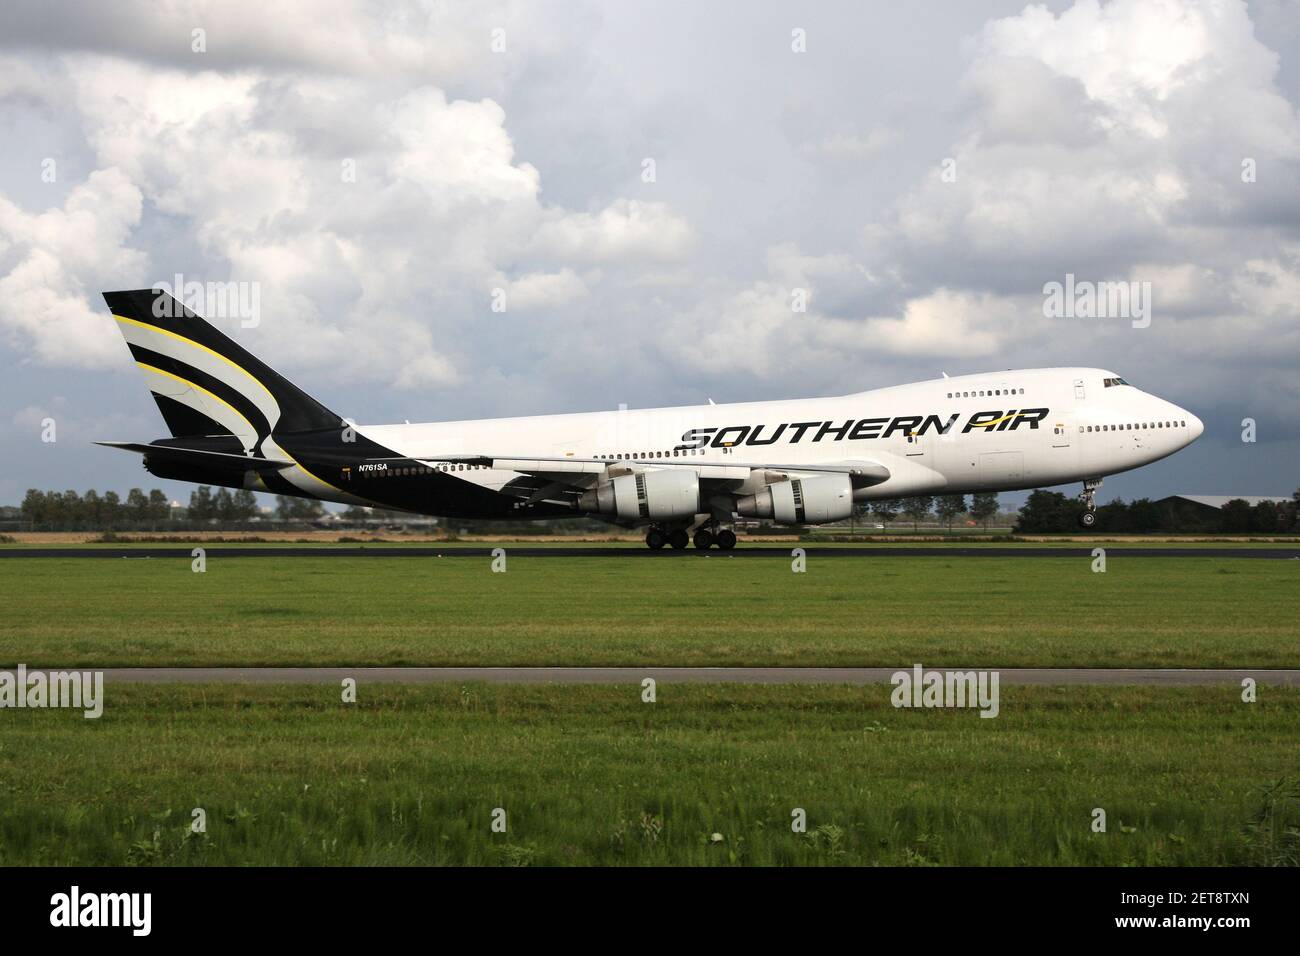 Southern Air Boeing 747-200F with registration N761SA just landed on runway 18R (Polderbaan) of Amsterdam Airport Schiphol. Stock Photo